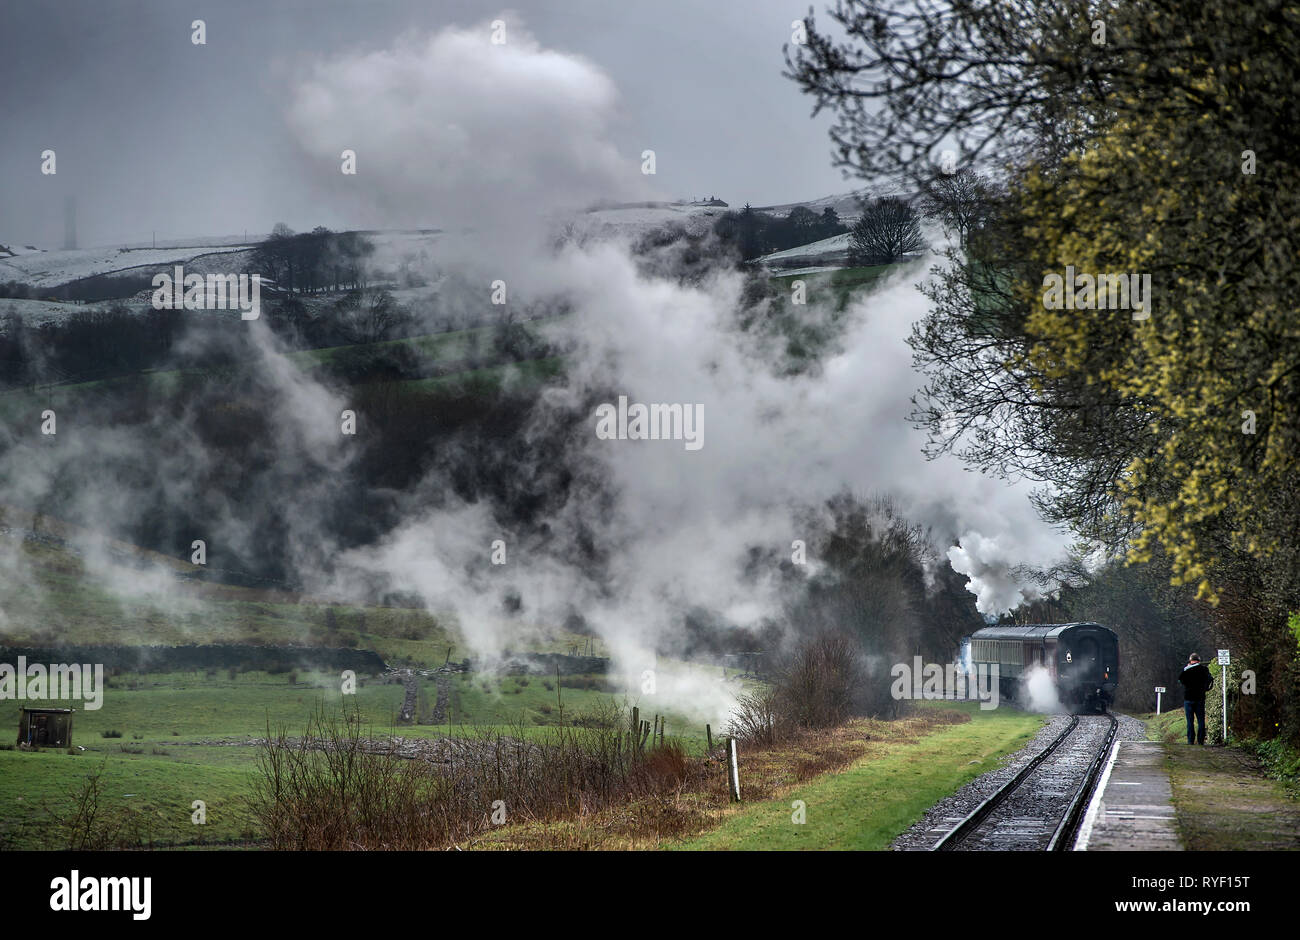 Lancashire, UK, Sunday March 10, 2019. The annual East Lancashire Railway Spring Steam Gala attracted bumper crowds of rail enthusiasts from all over  Stock Photo